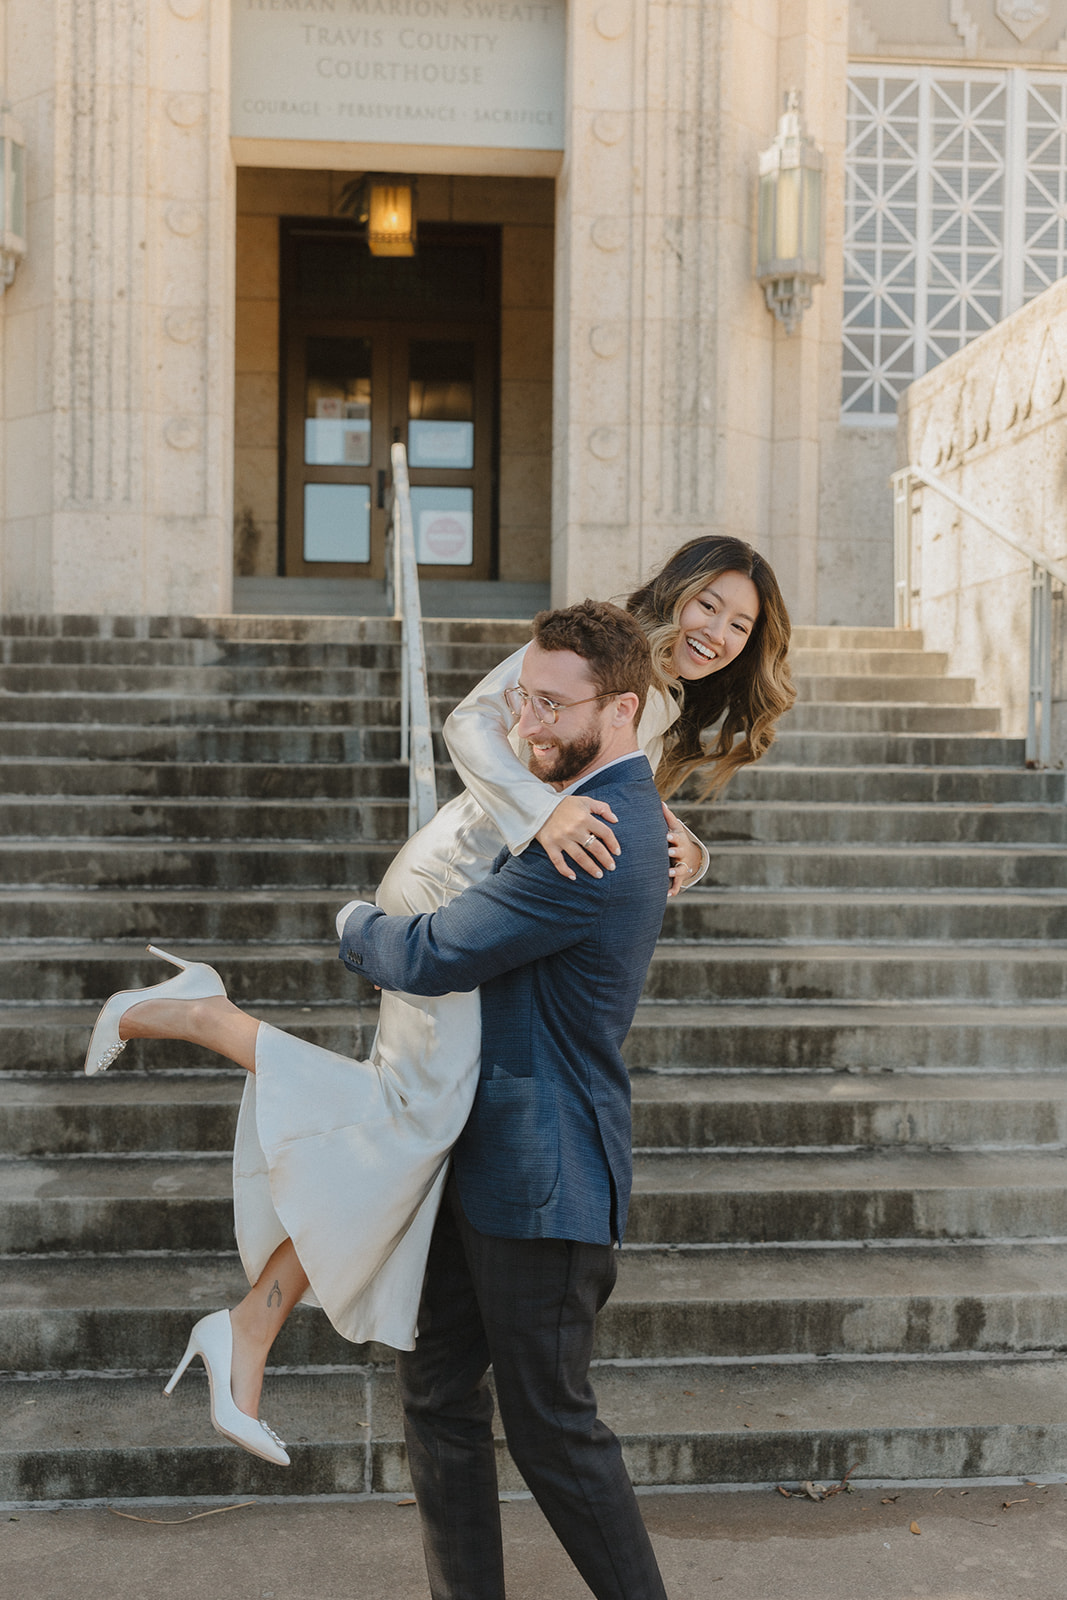 downtown courthouse elopement